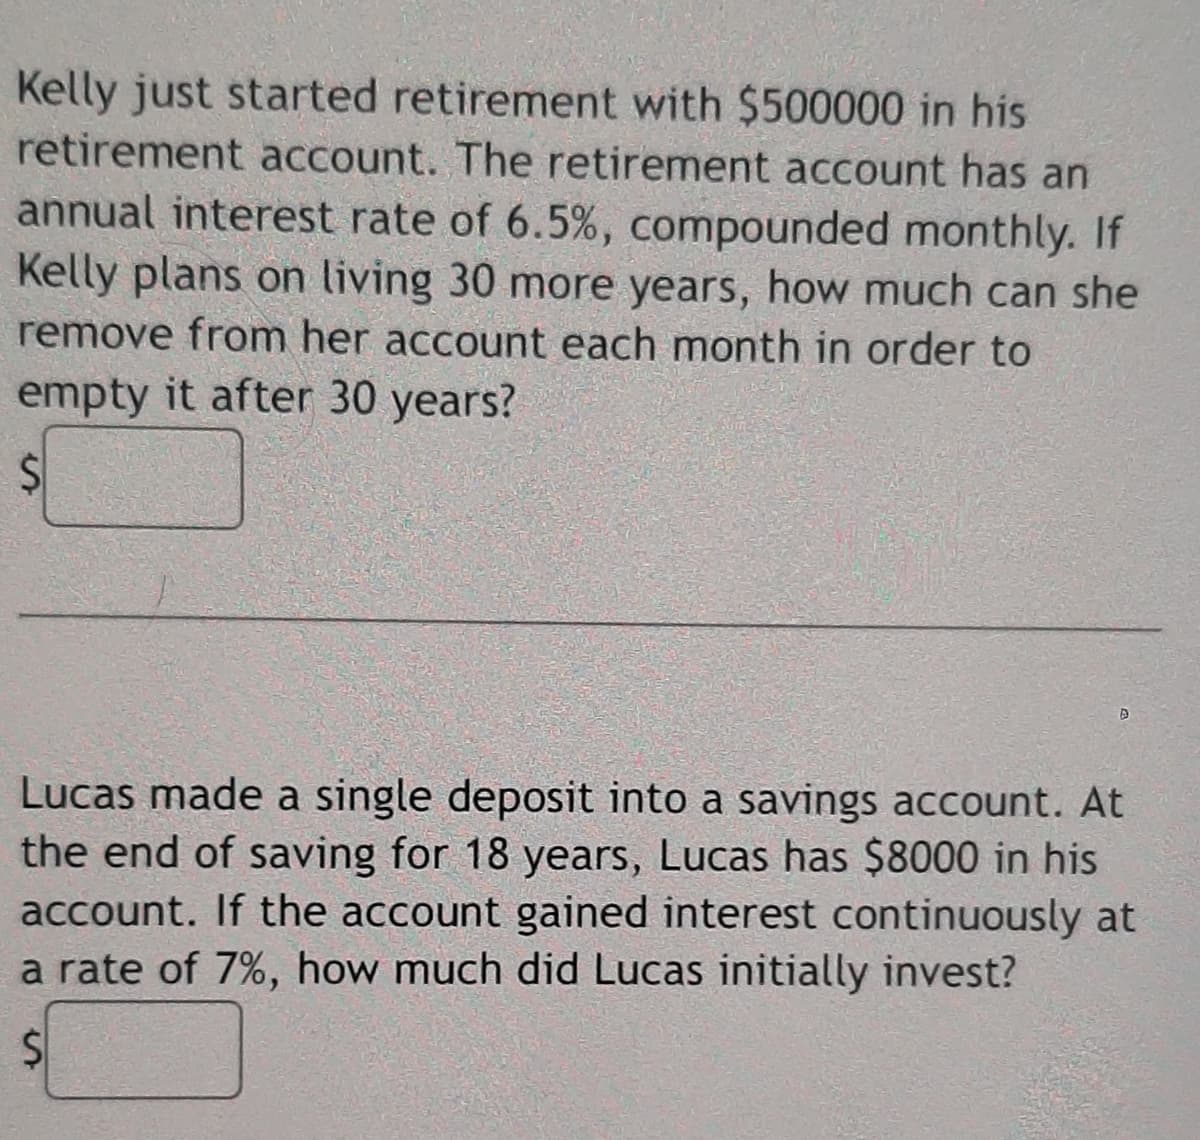 Kelly just started retirement with $500000 in his
retirement account. The retirement account has an
annual interest rate of 6.5%, compounded monthly. If
Kelly plans on living 30 more years, how much can she
remove from her account each month in order to
empty it after 30 years?
Lucas made a single deposit into a savings account. At
the end of saving for 18 years, Lucas has $8000 in his
account. If the account gained interest continuously at
a rate of 7%, how much did Lucas initially invest?
